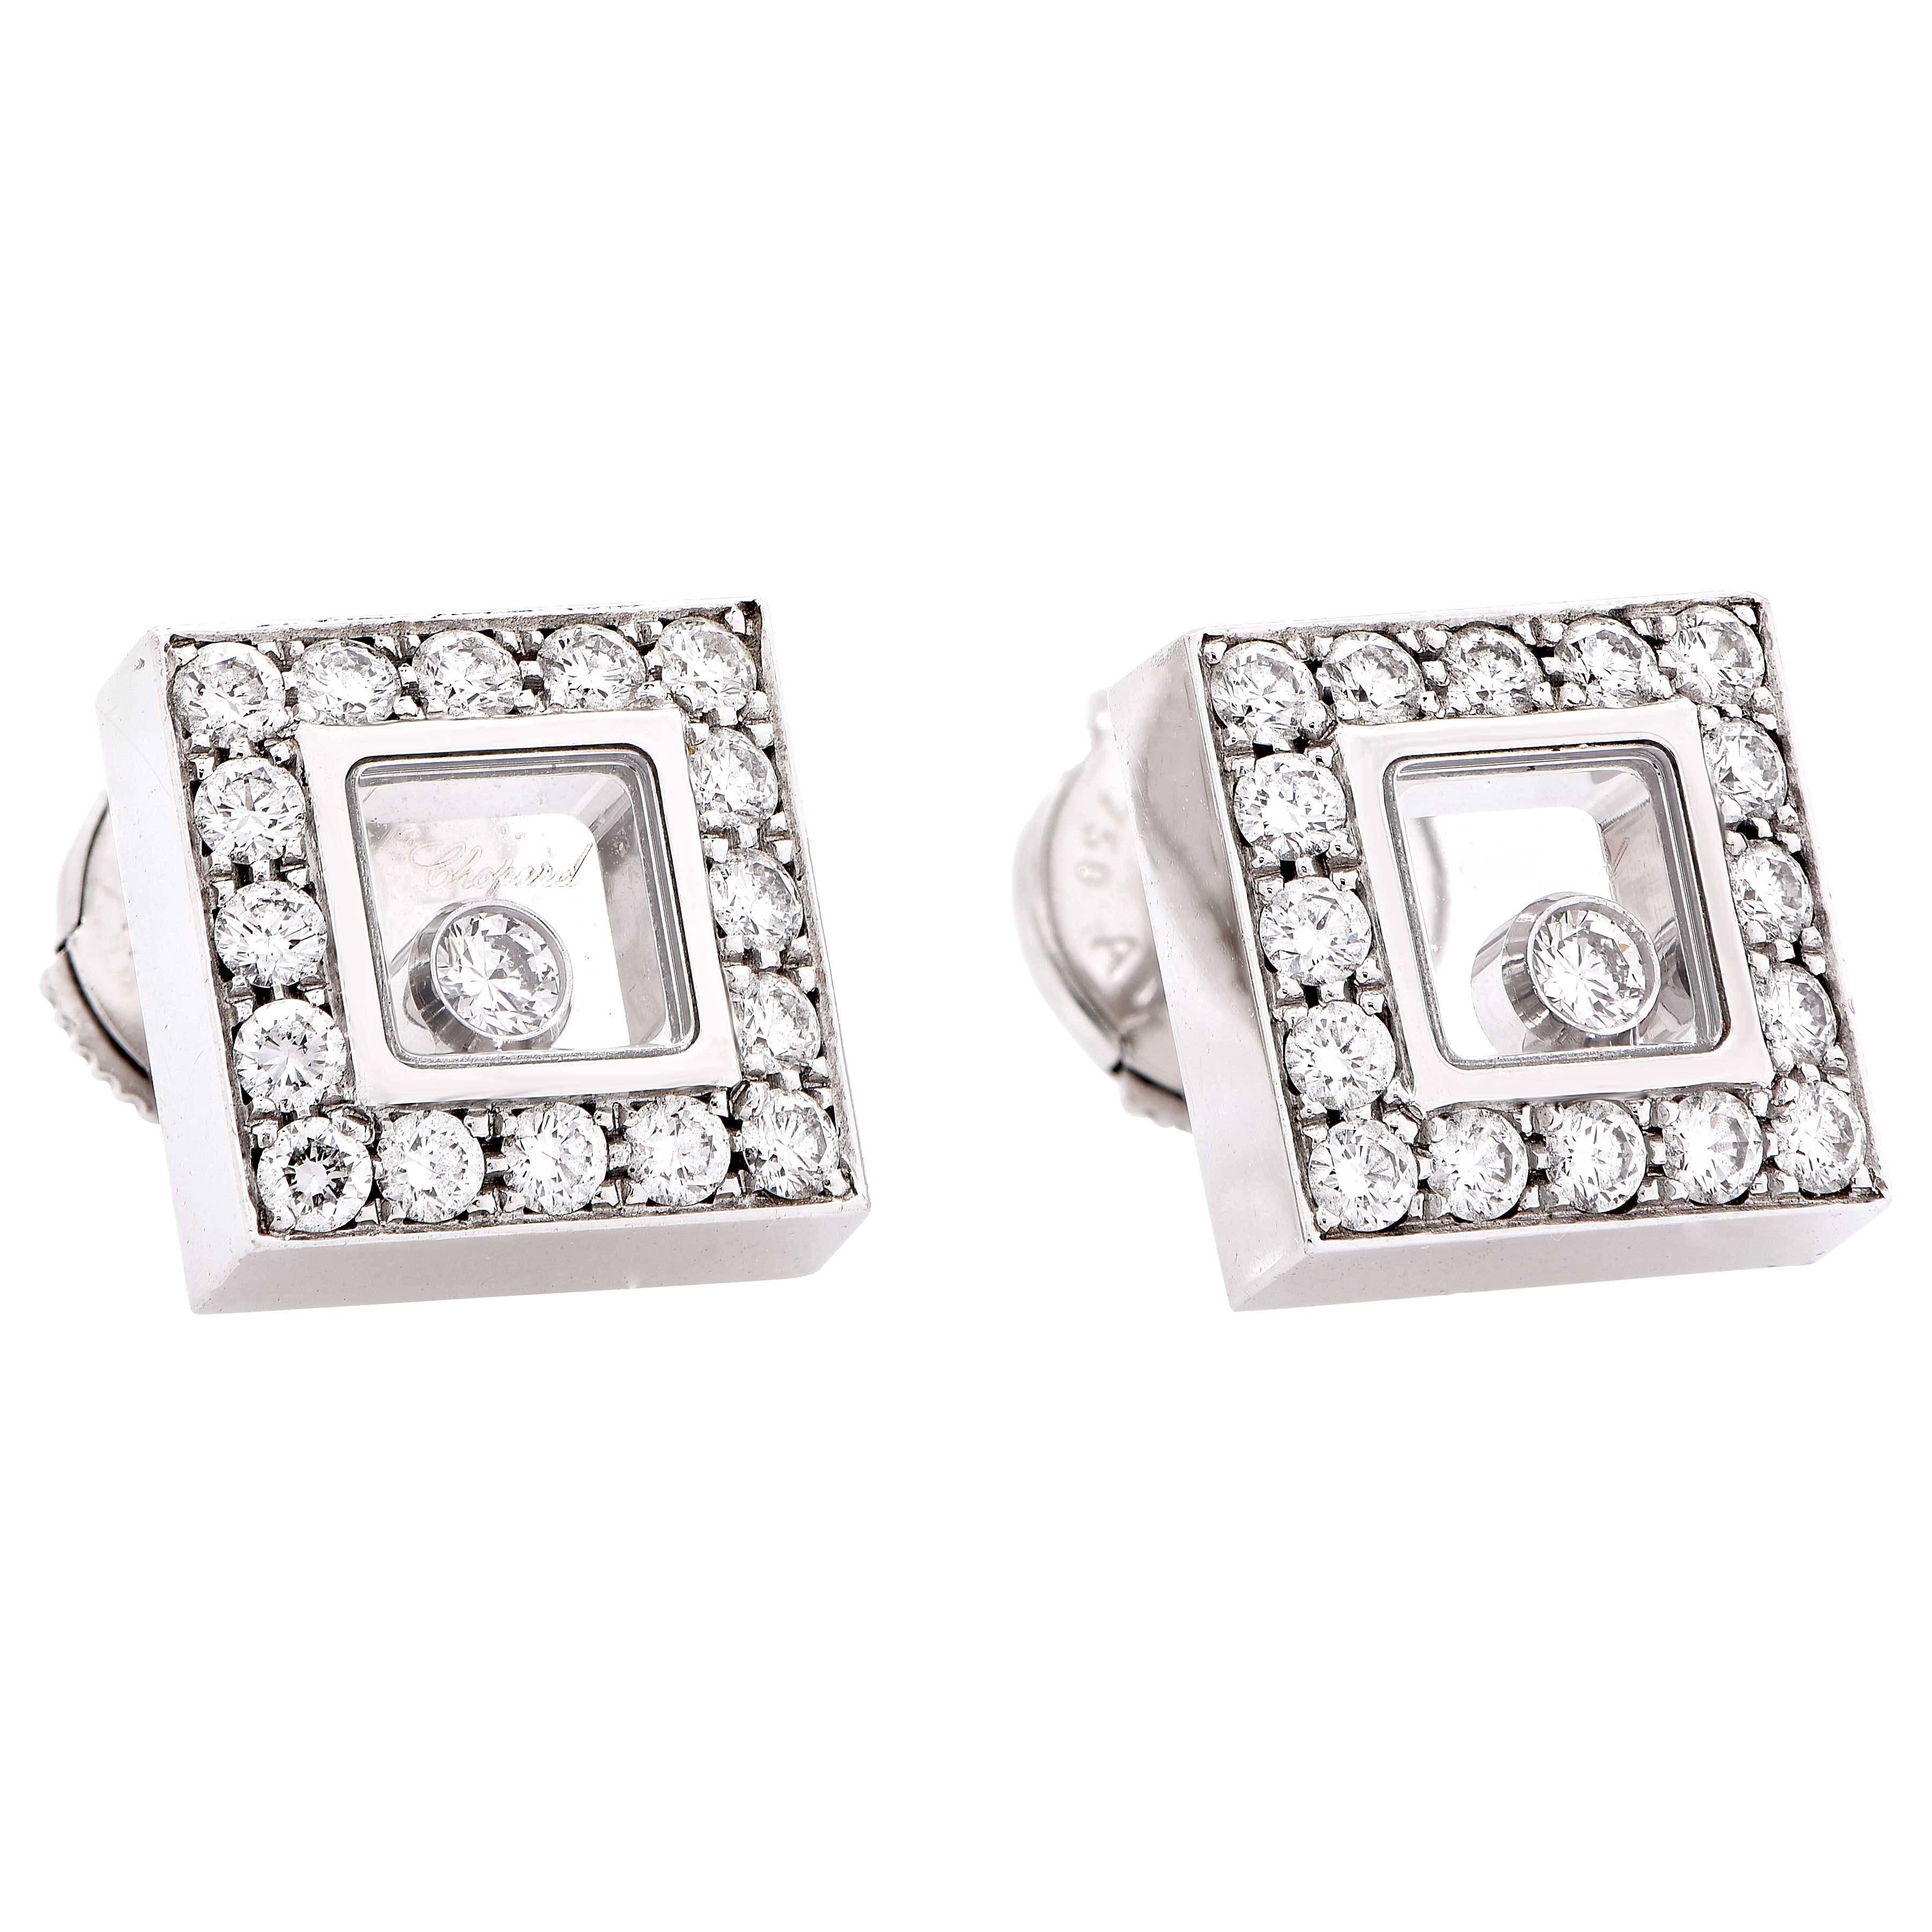 Marvelous 18kt white gold is crafted into squares that are embellished with striking white diamonds as a single floating diamond dances in the center of each stud earring. New in box with papers.
Chopard model 832896-1001
32 Pavee set diamonds with